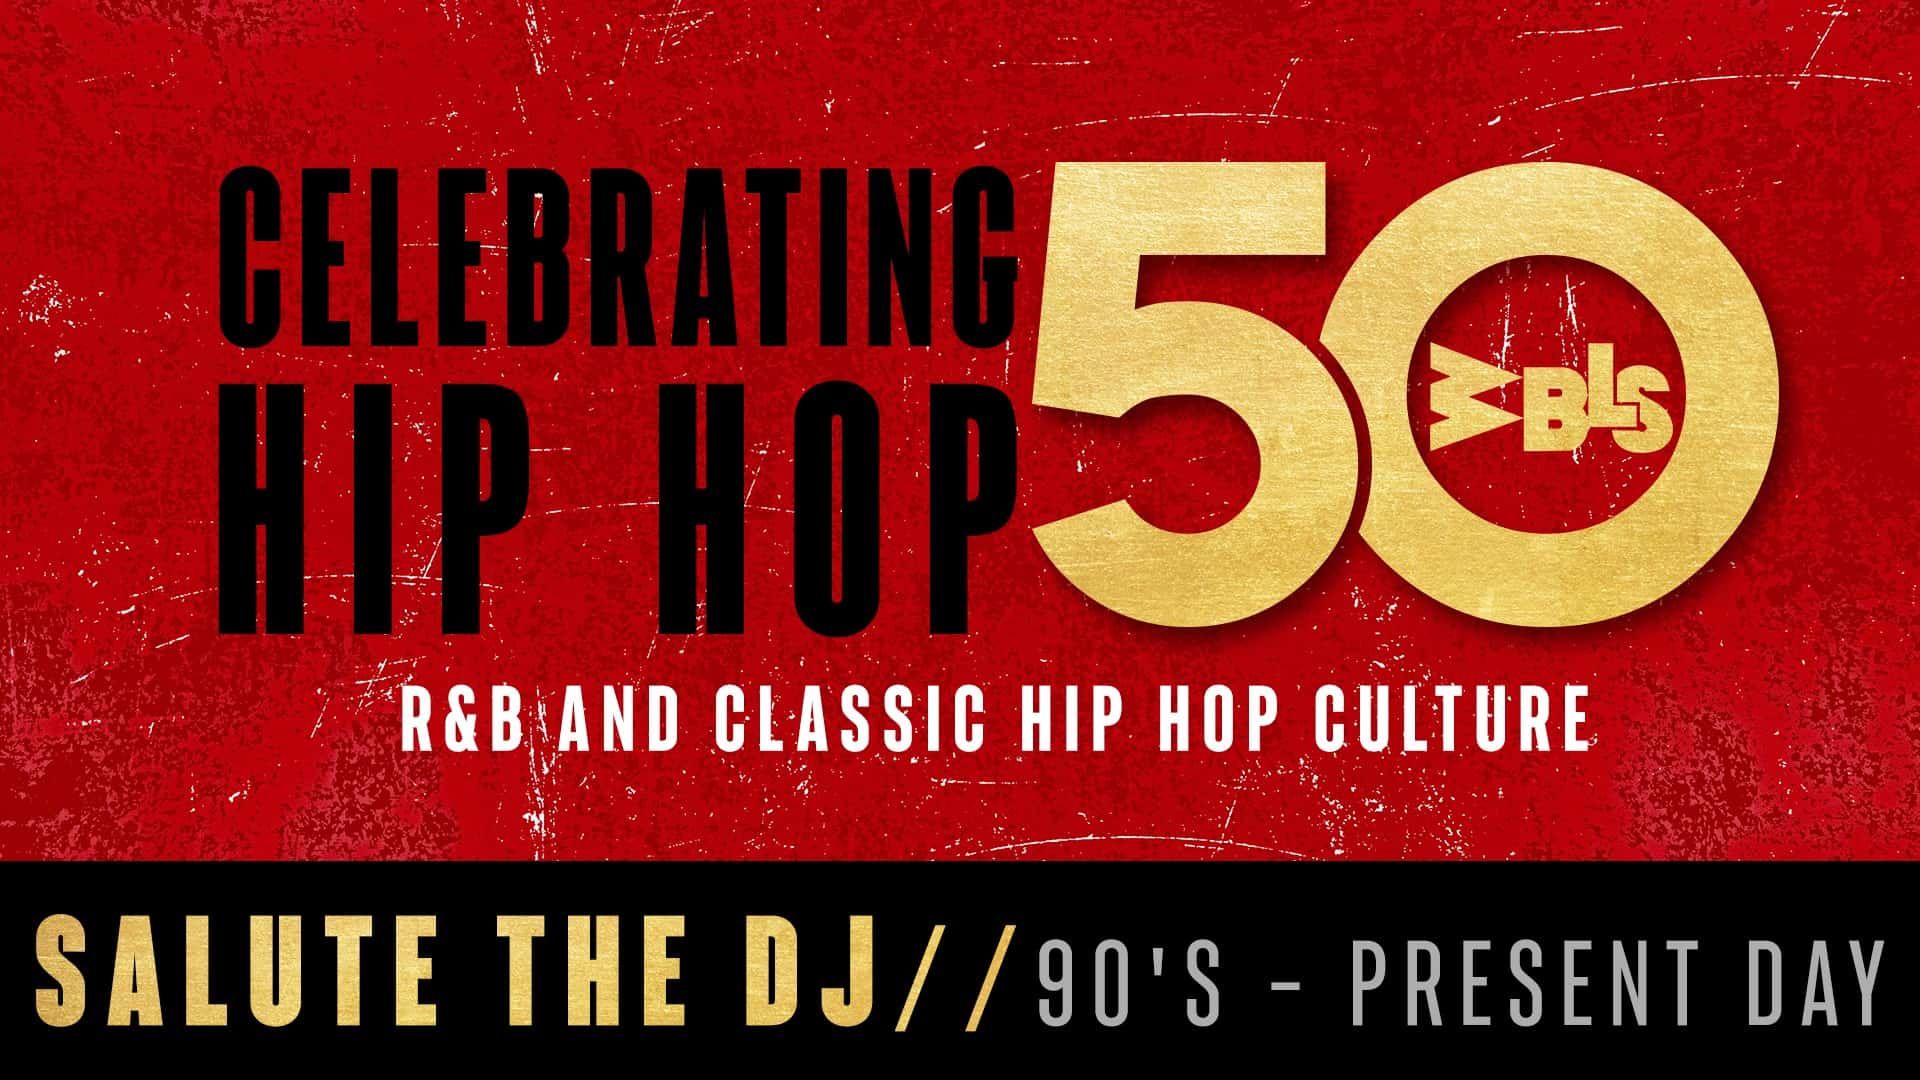 How The 1990's Changed Hip Hop & Revolutionized The DJ